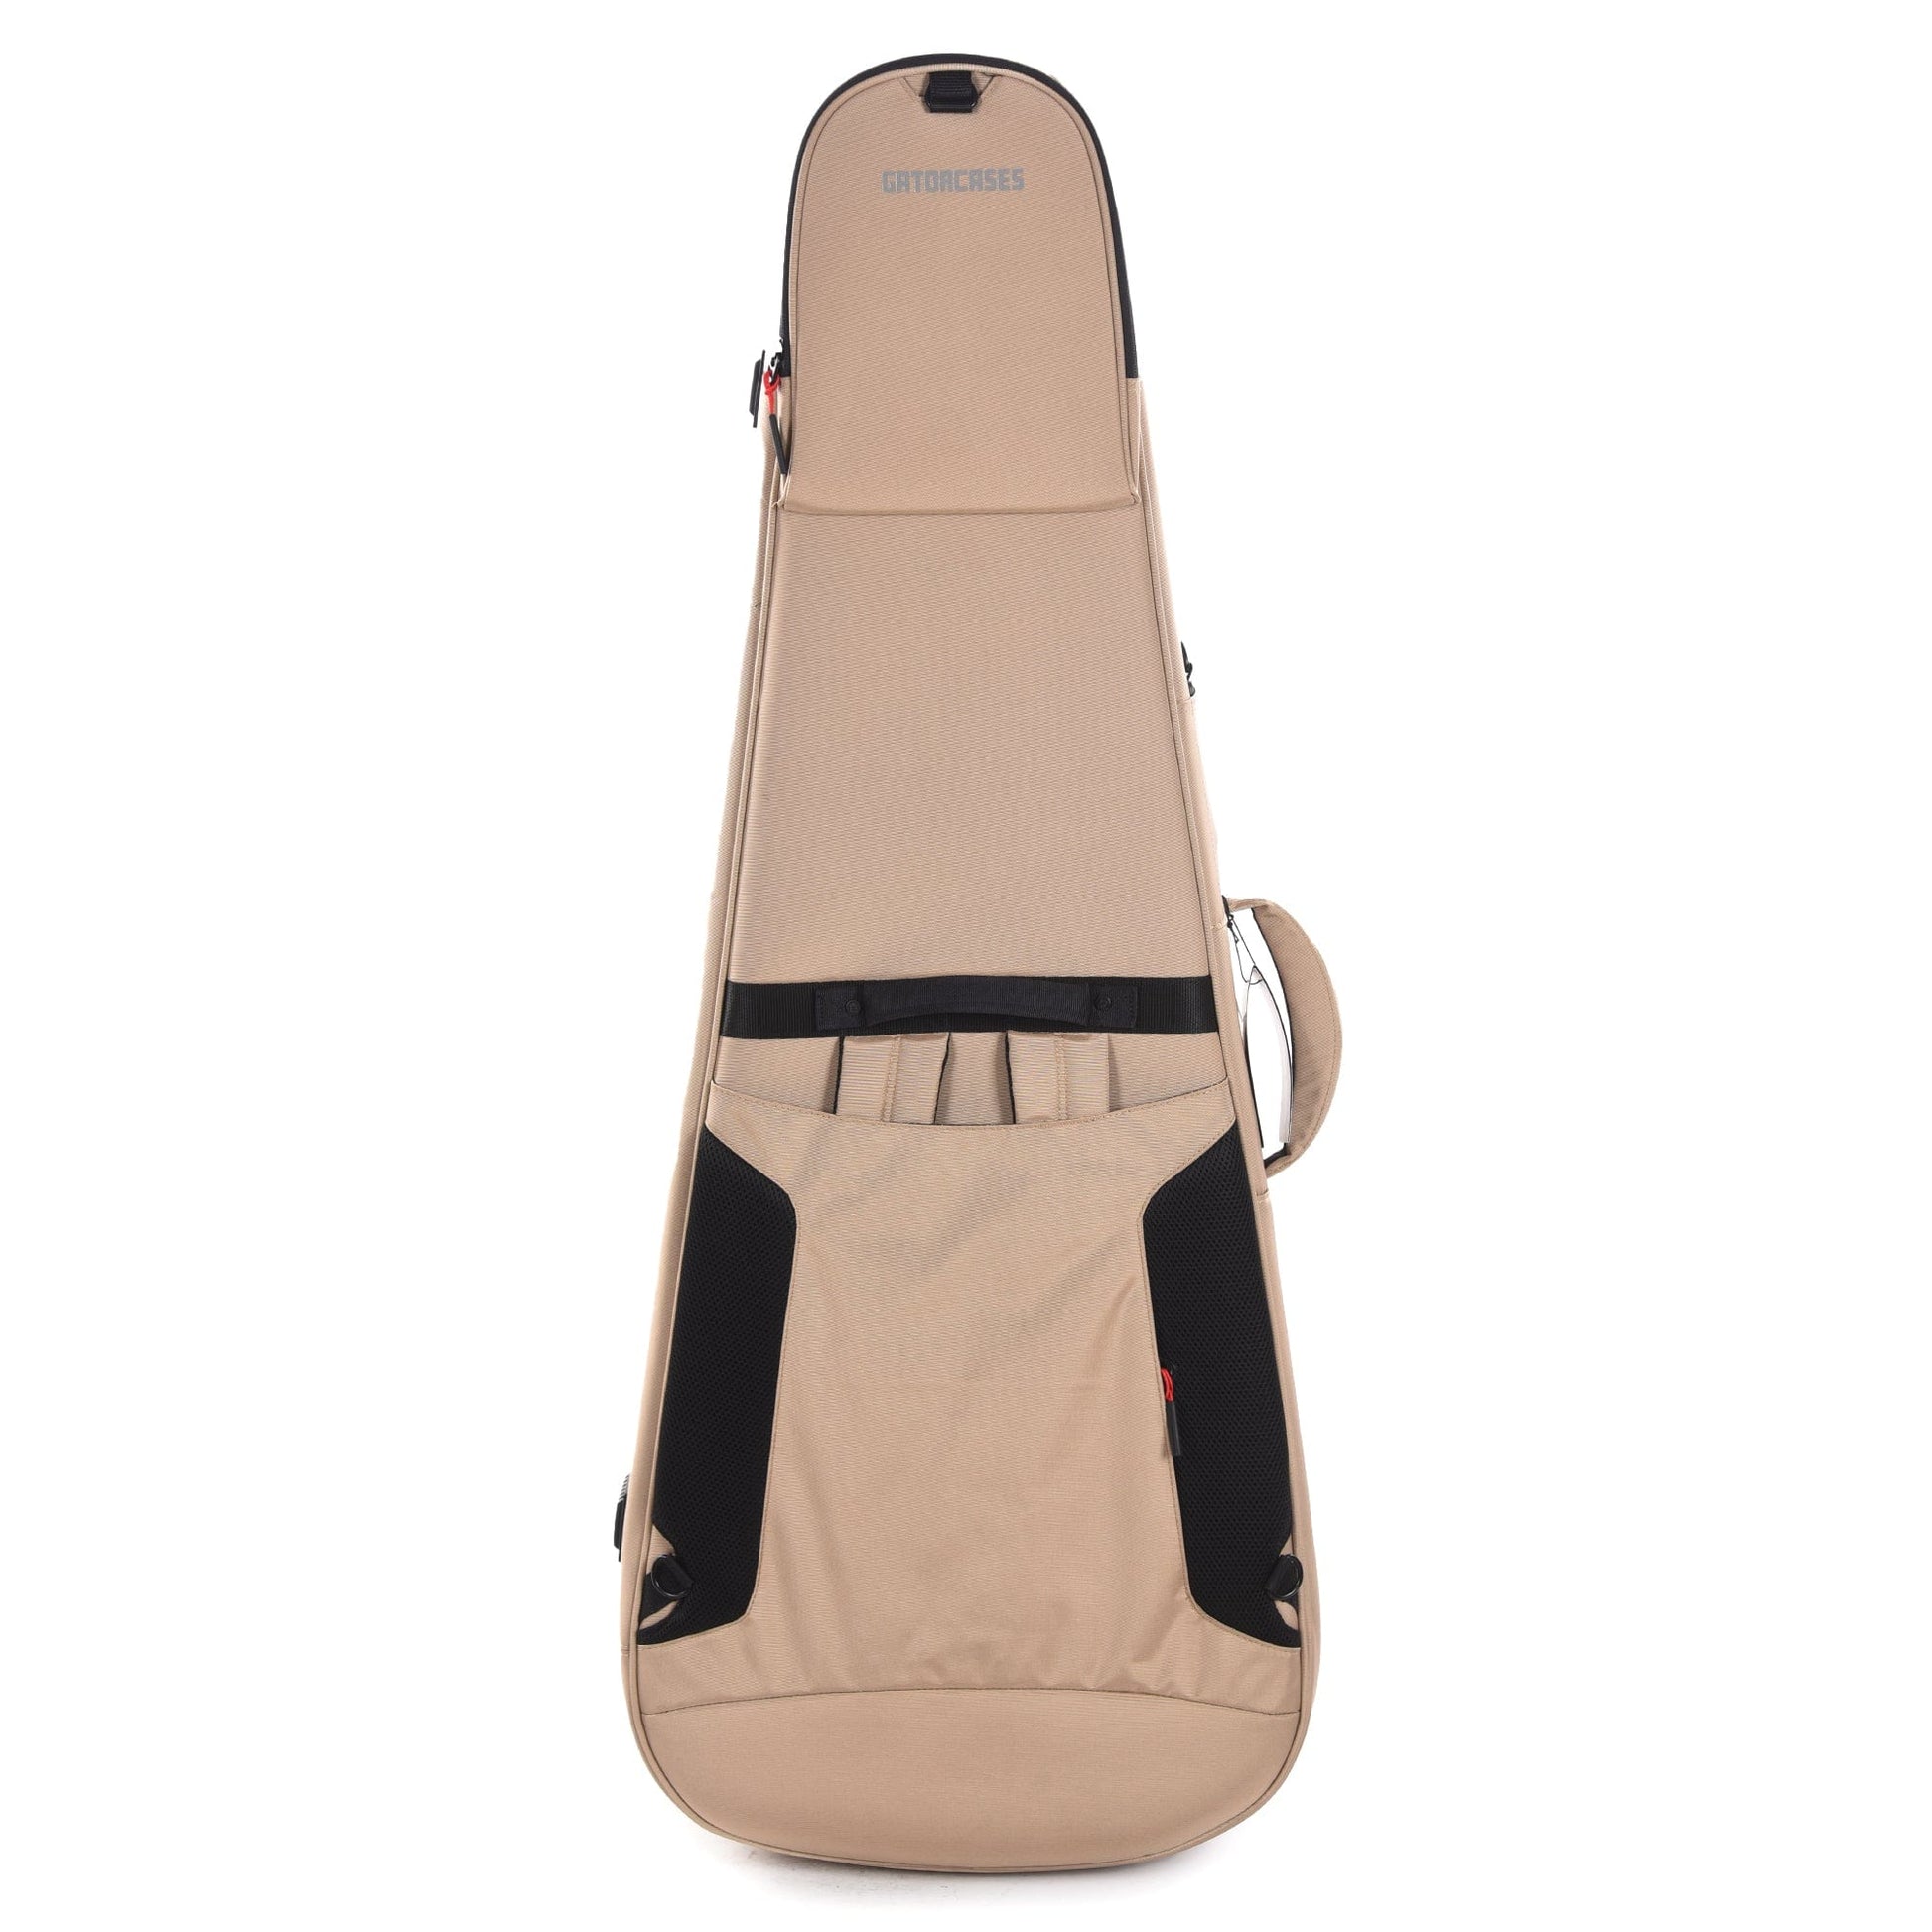 Gator ICON Series Gig Bag for Dreadnaught Acoustic Guitars Khaki Accessories / Cases and Gig Bags / Guitar Cases